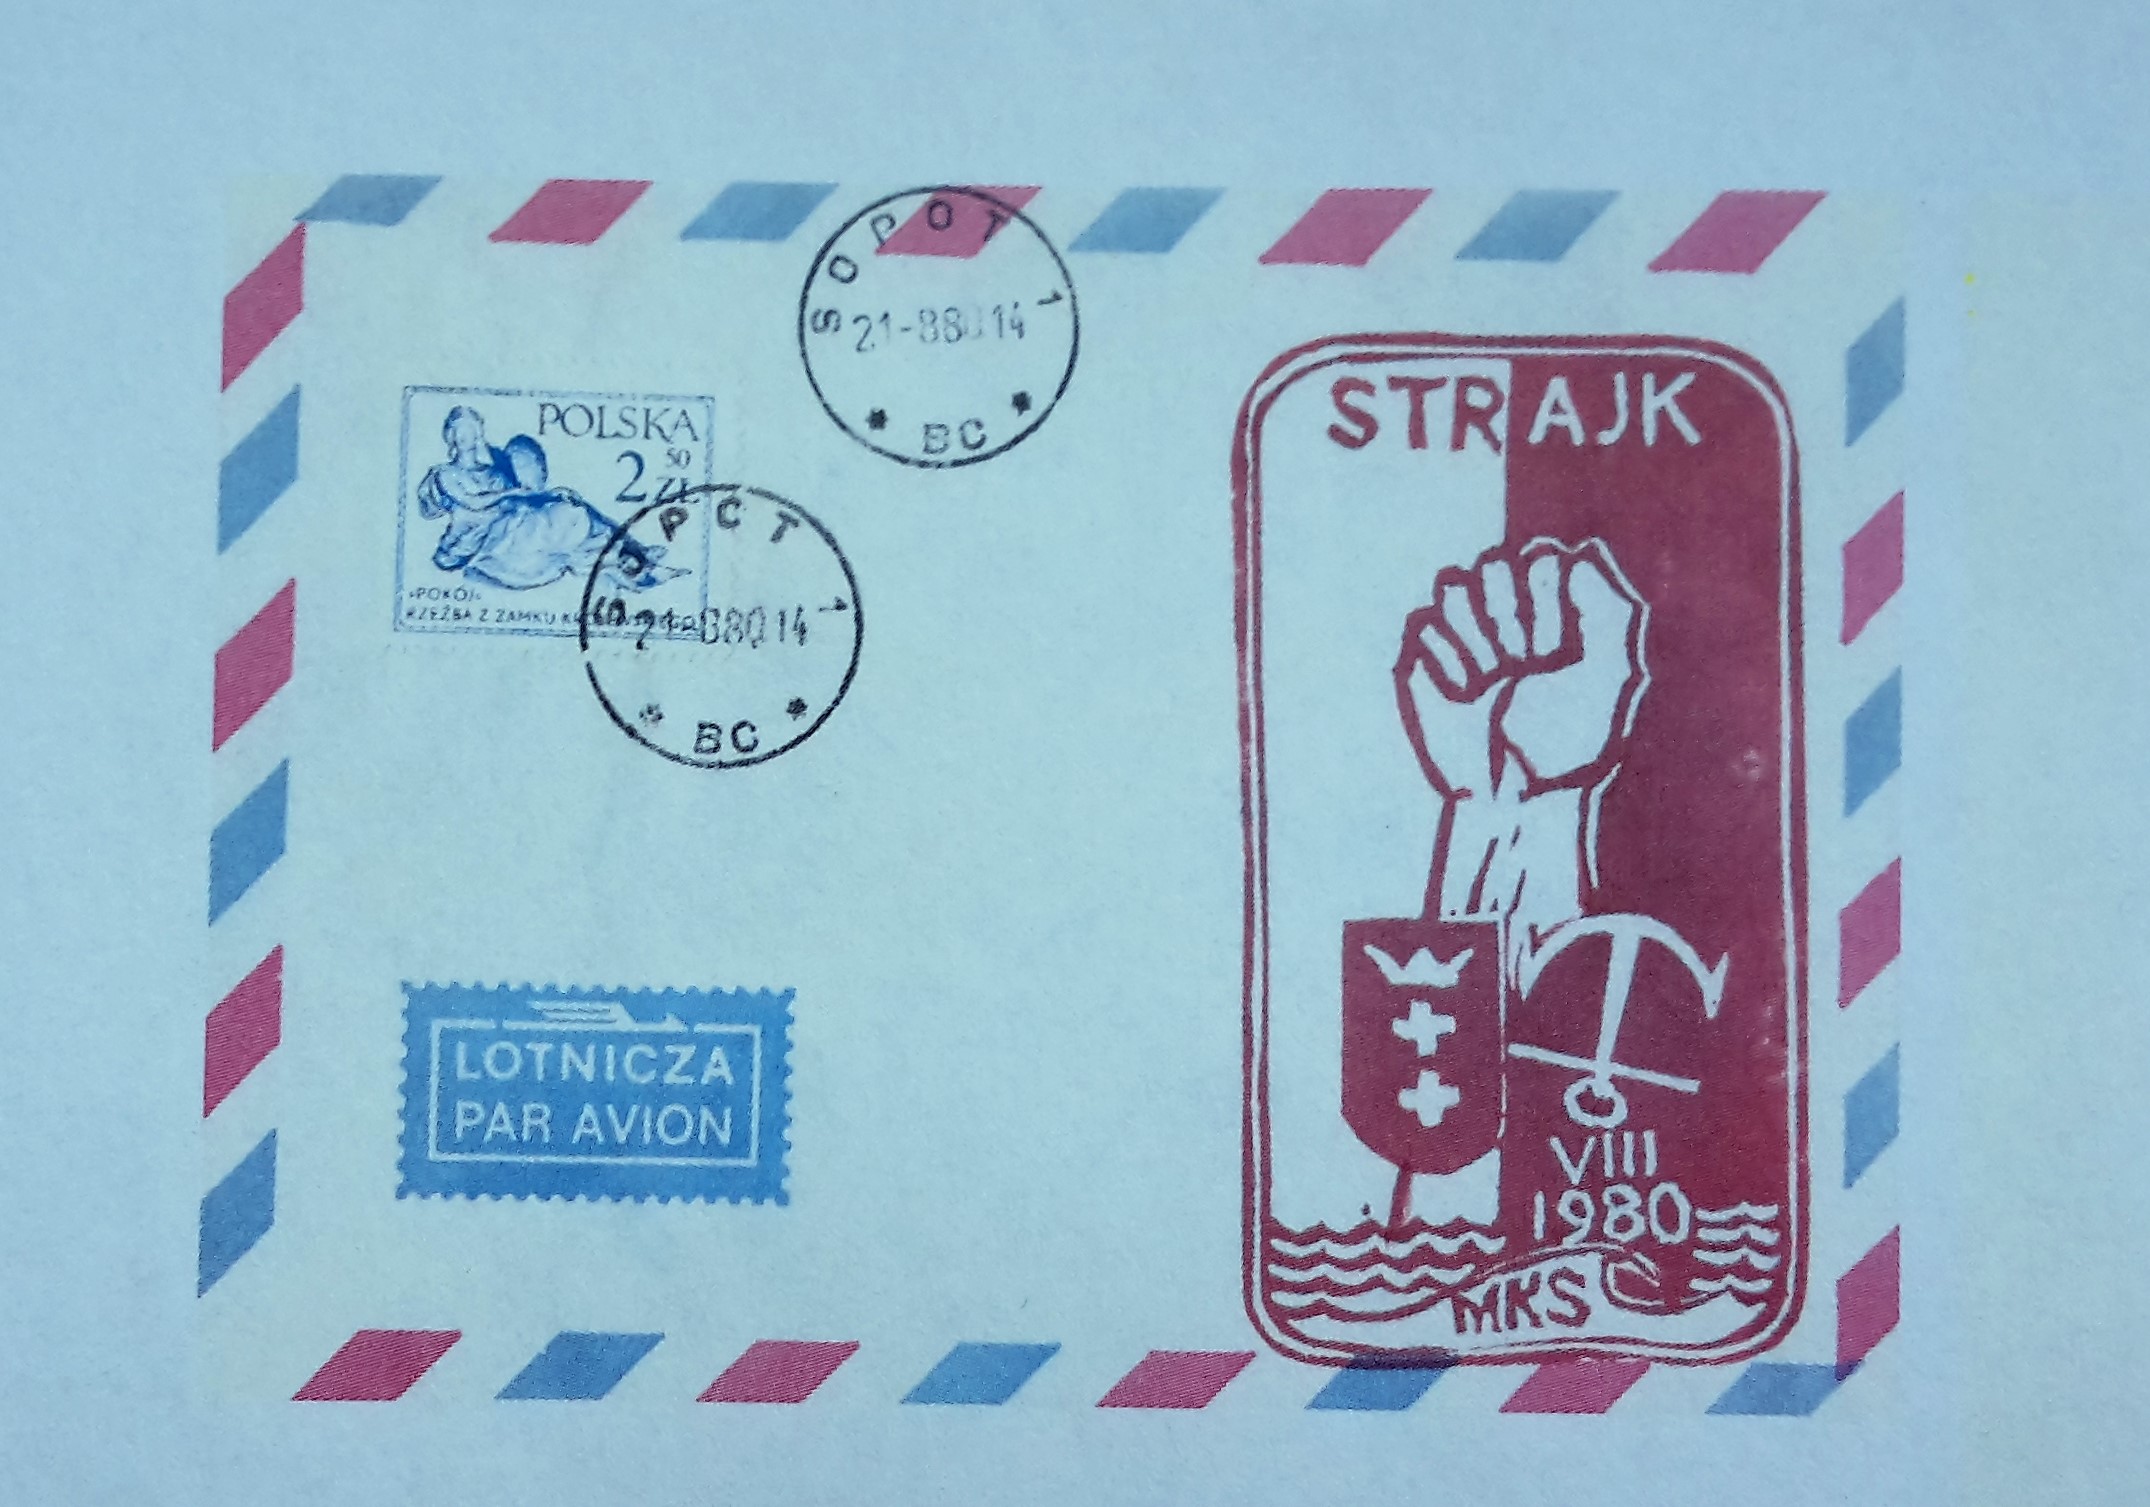 Envelope with a copy of the stamp created by Józef Figiela during the strikes in August 1980 in the Gdansk Shipyard.